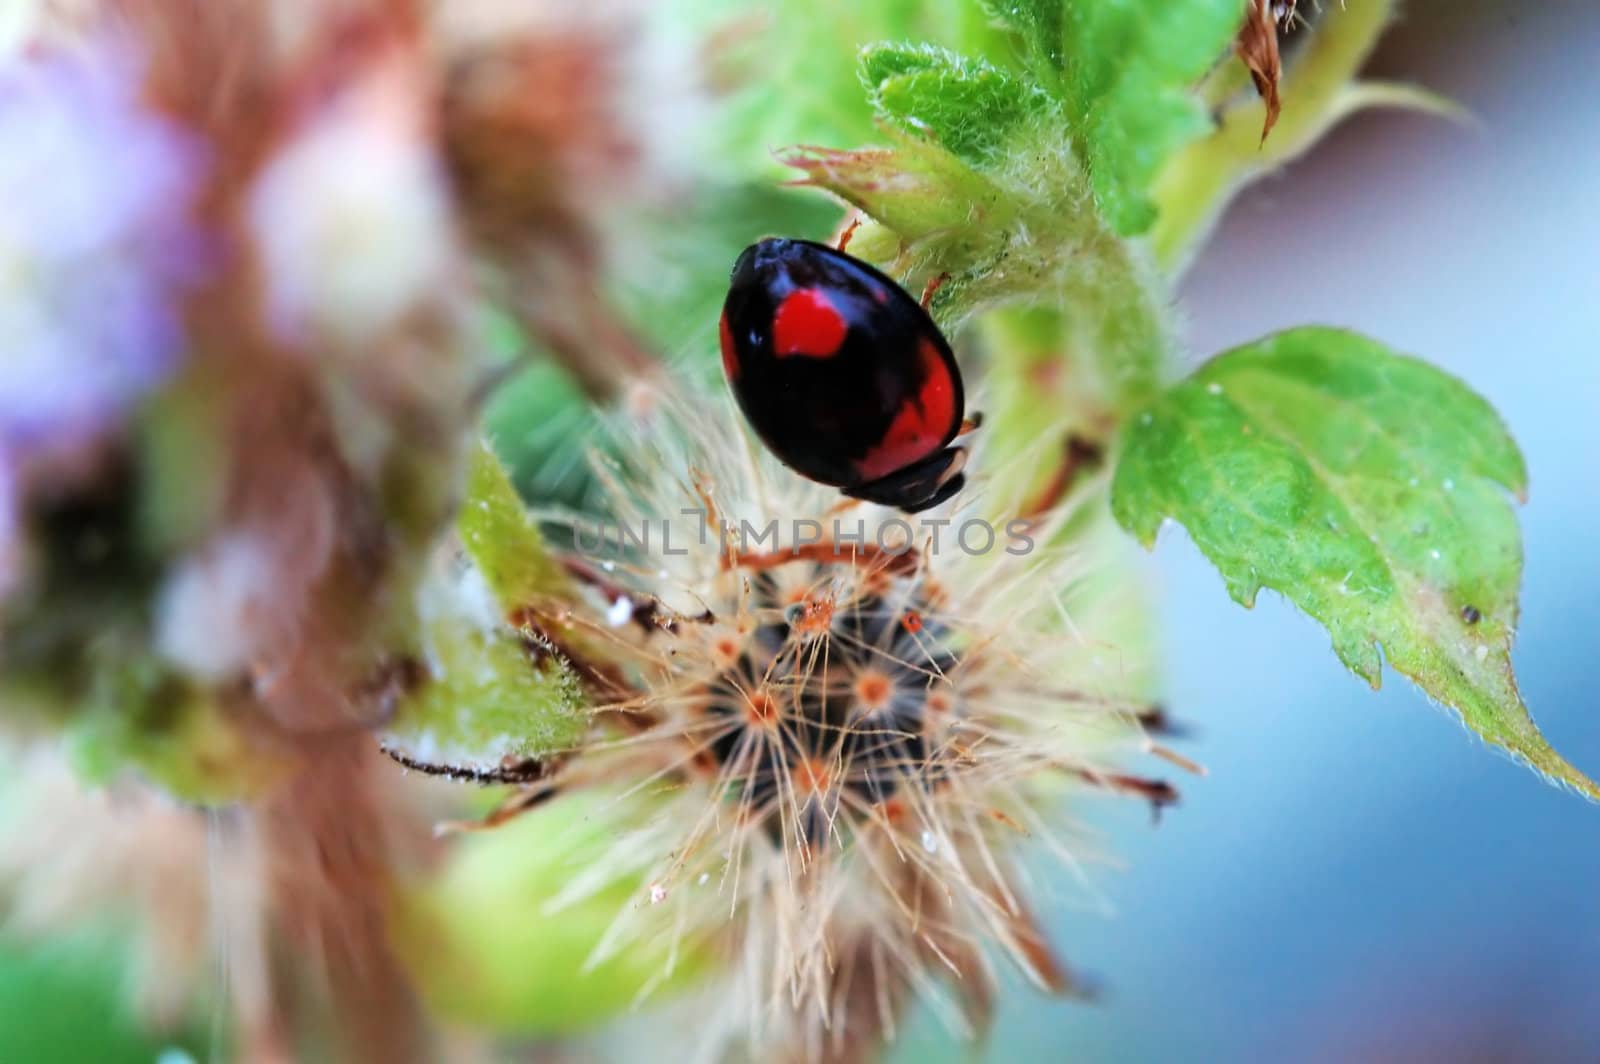 Like a painting picture of a ladybird